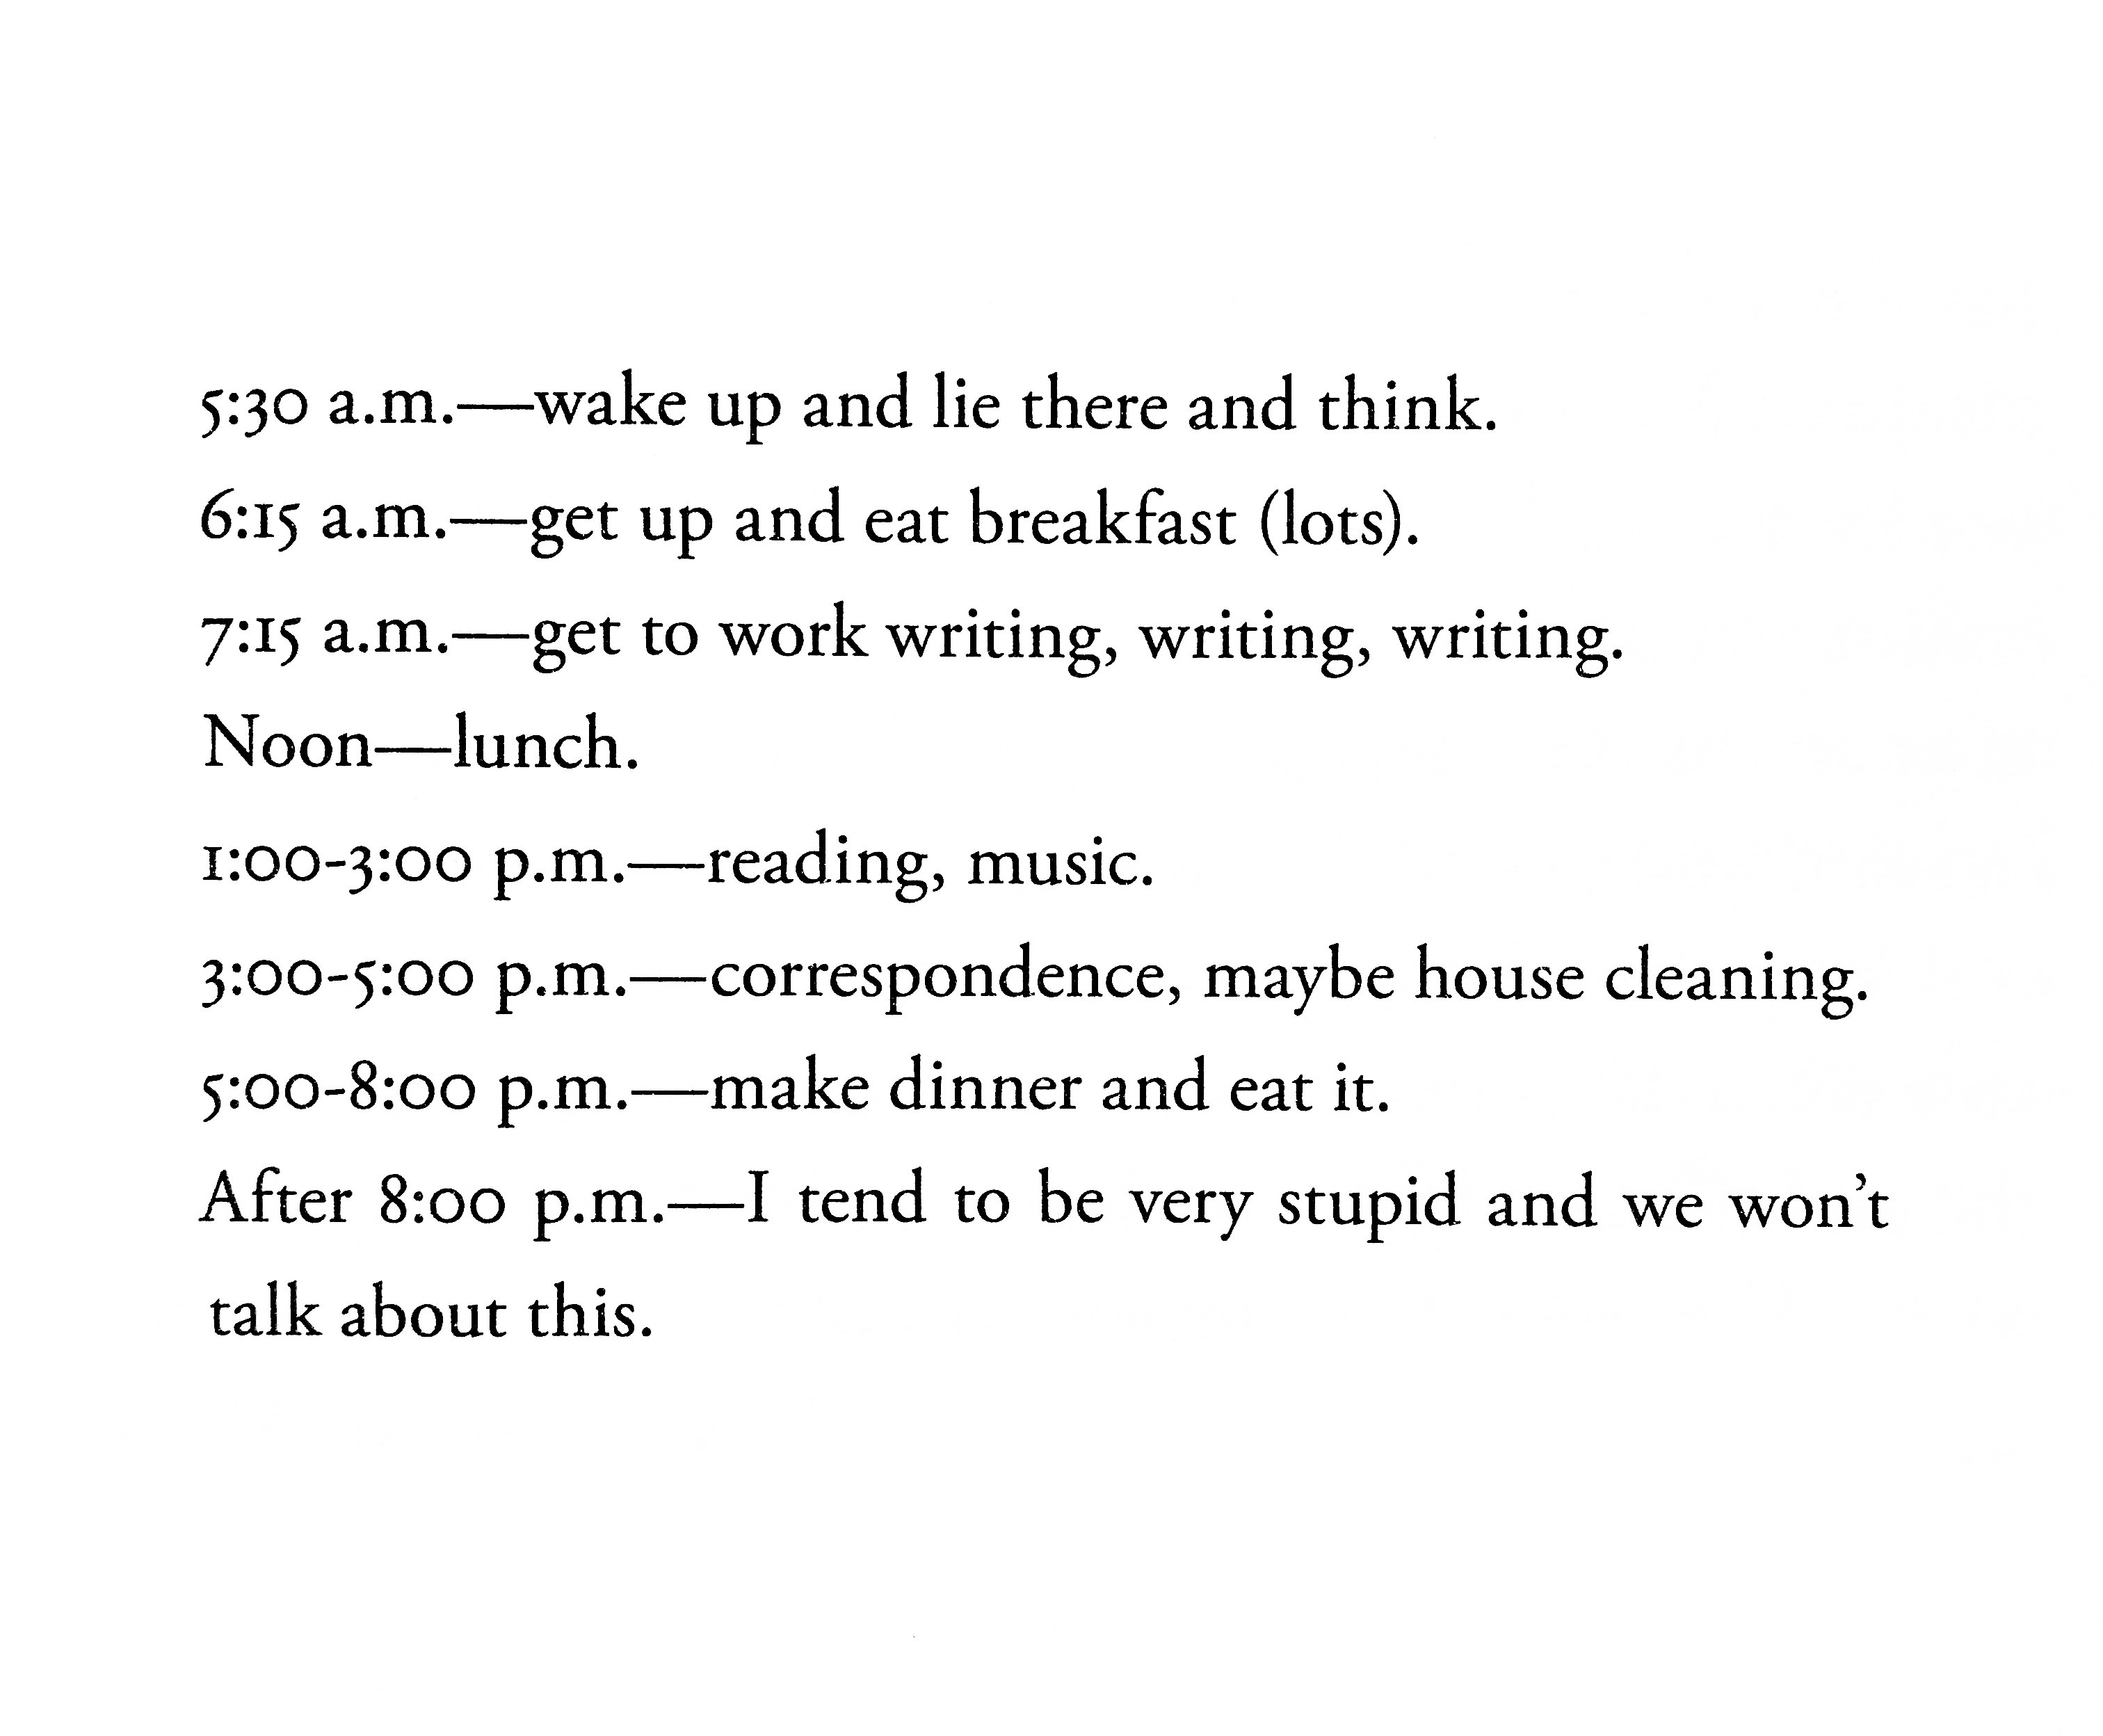 A timetable of the author Ursula Le Guin's daily routine.